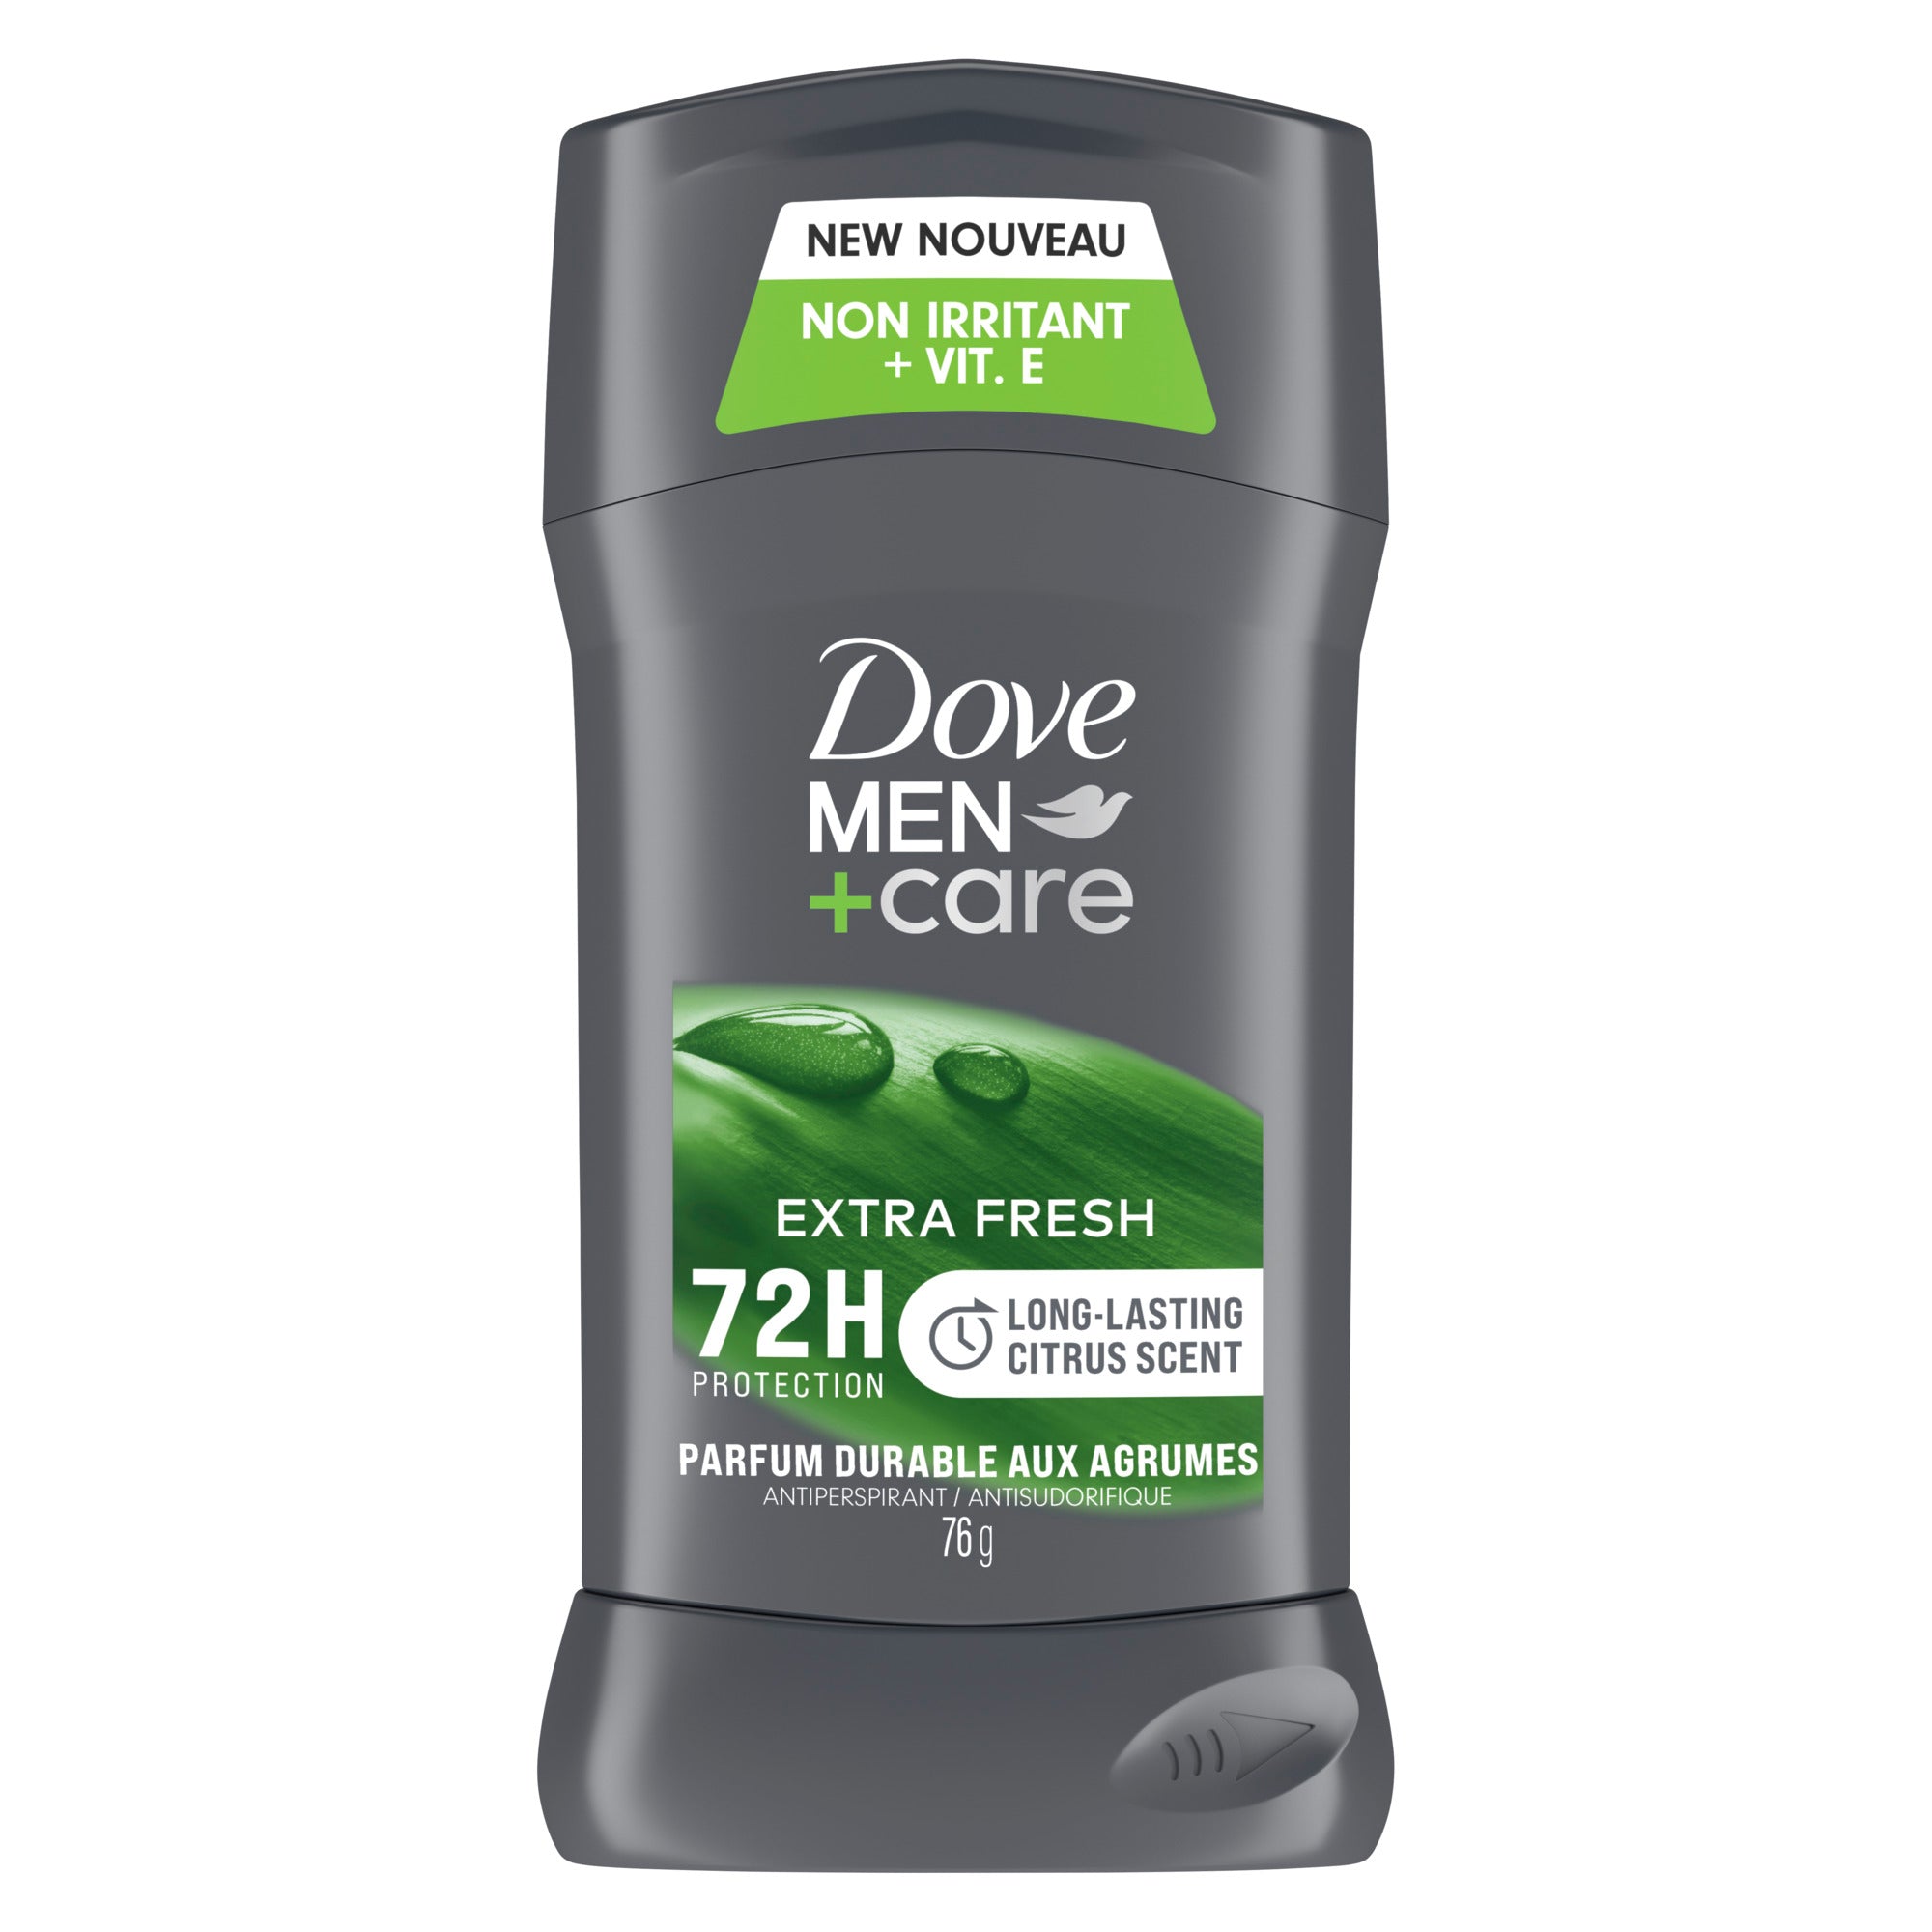 Showing the front angle view of the Dove Men+Care Extra Fresh Antiperspirant Stick 76g product packaging.